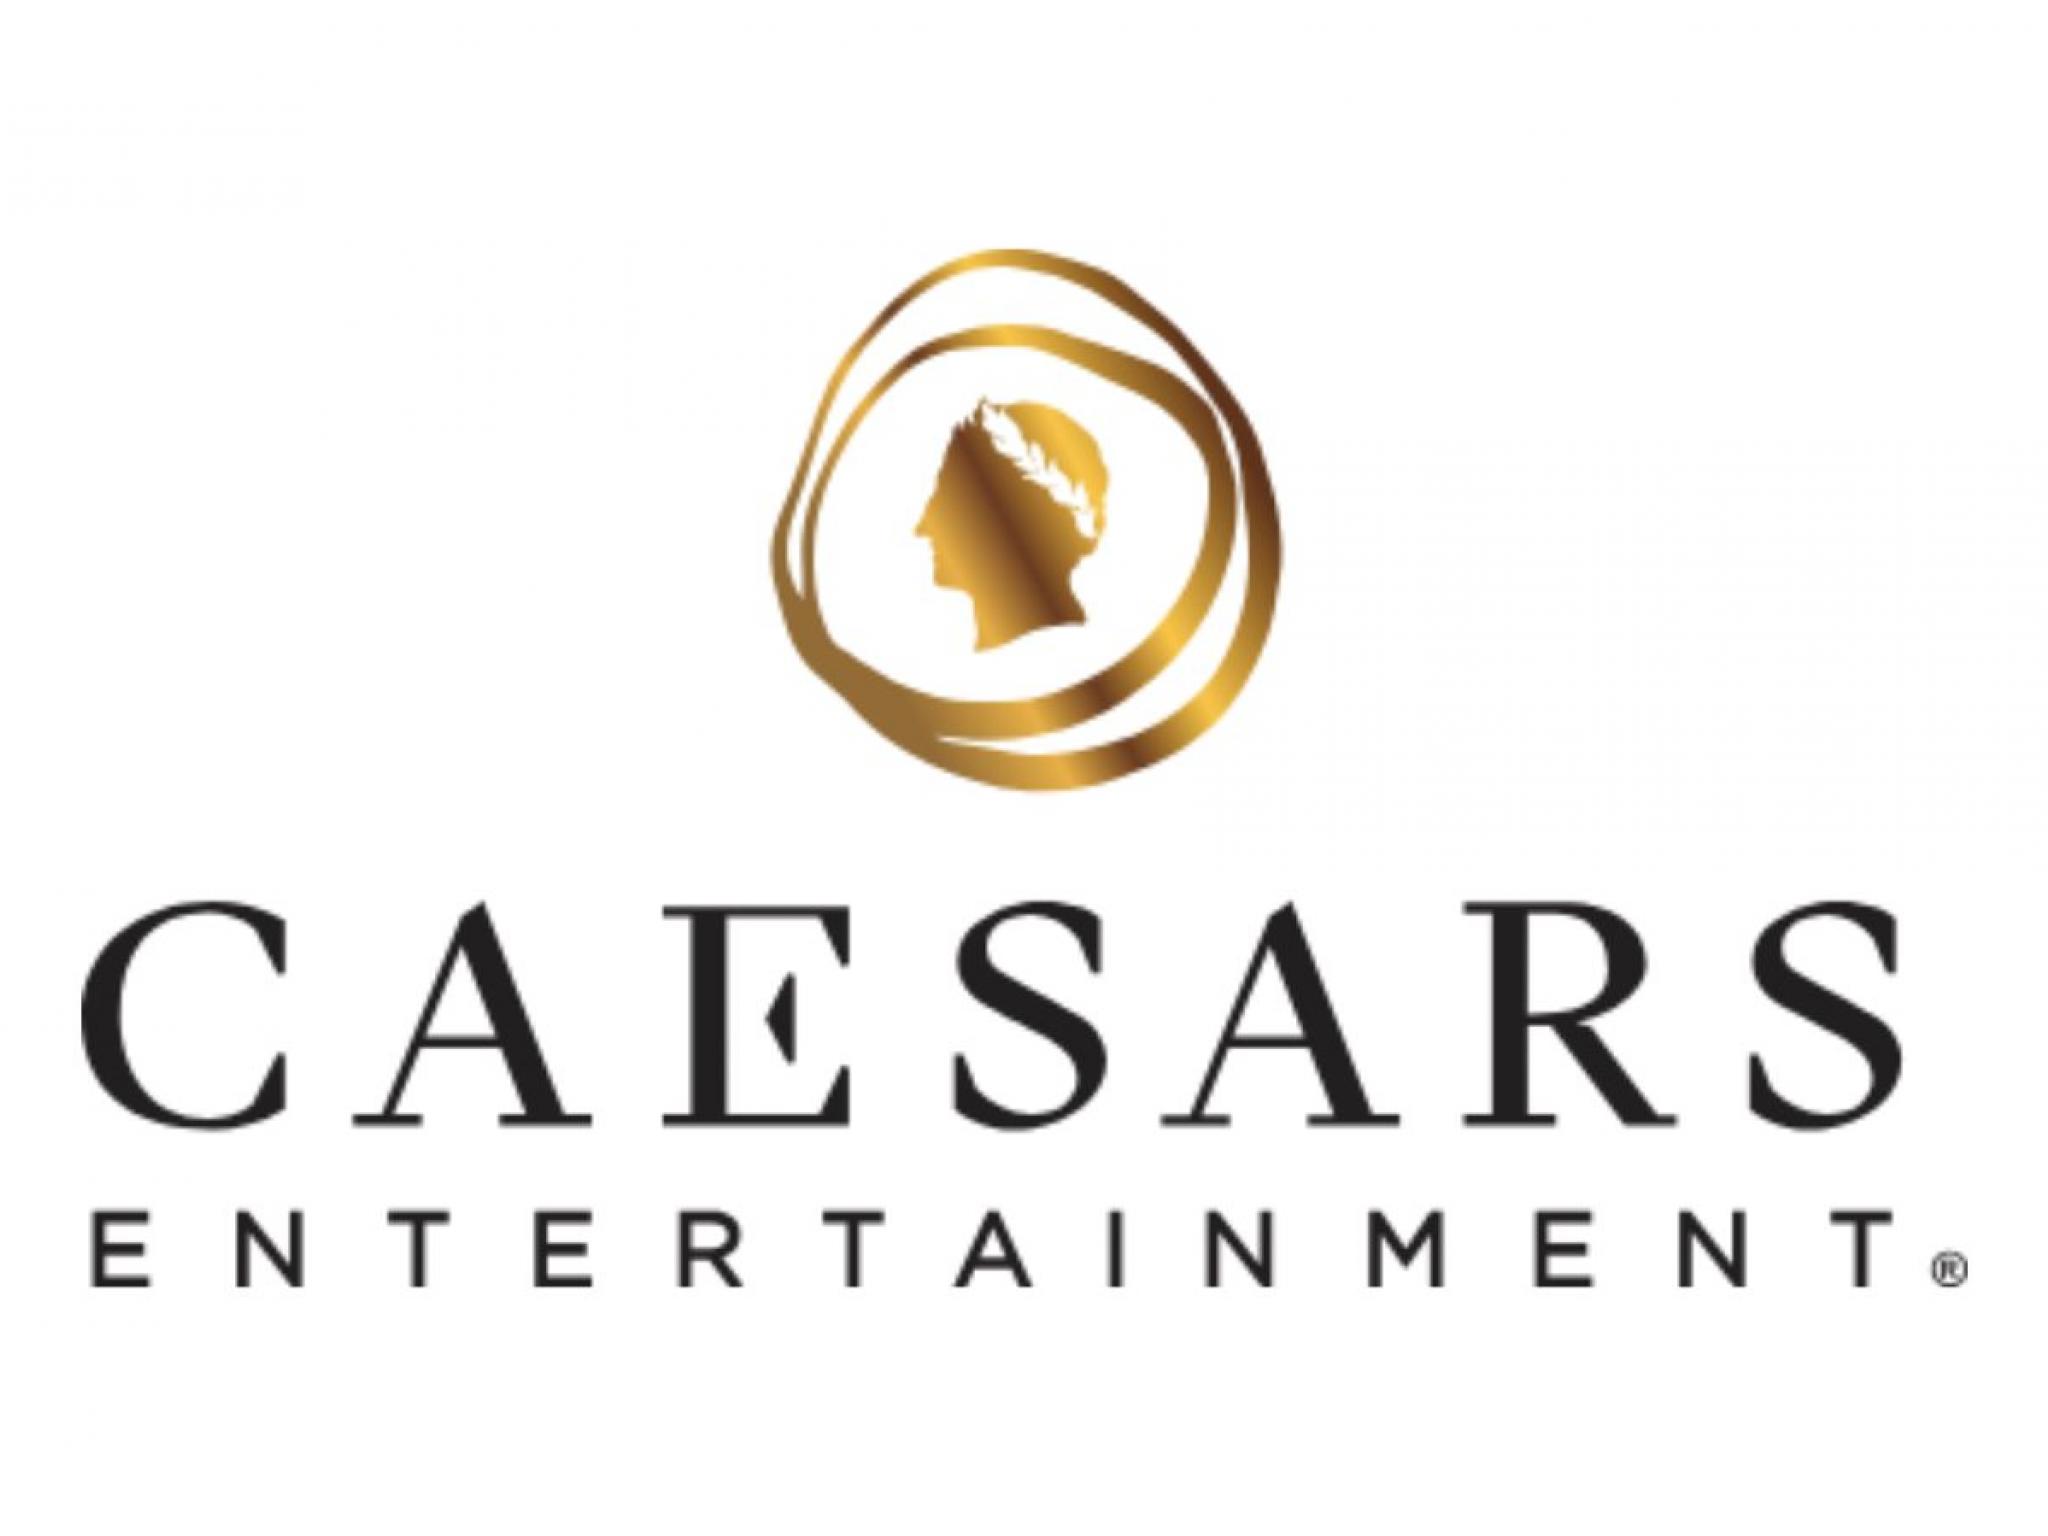  insiders-buying-caesars-entertainment-and-2-other-stocks 